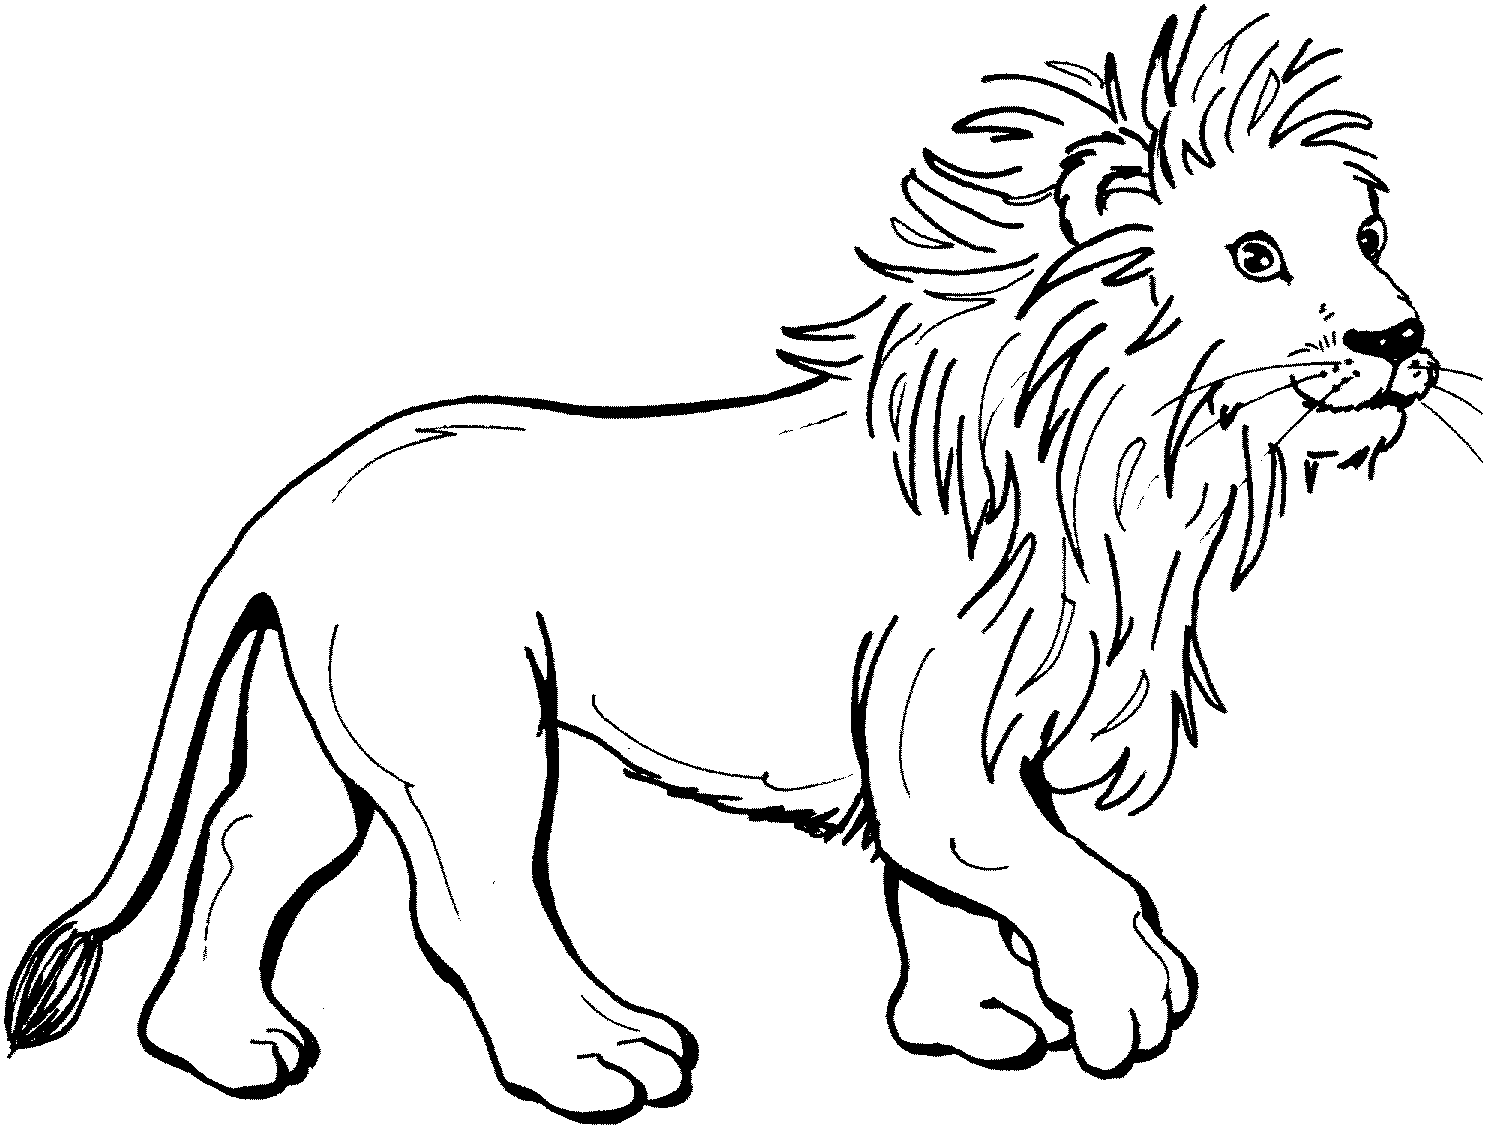 56 Unicorn Lion Coloring Pages To Print with Printable